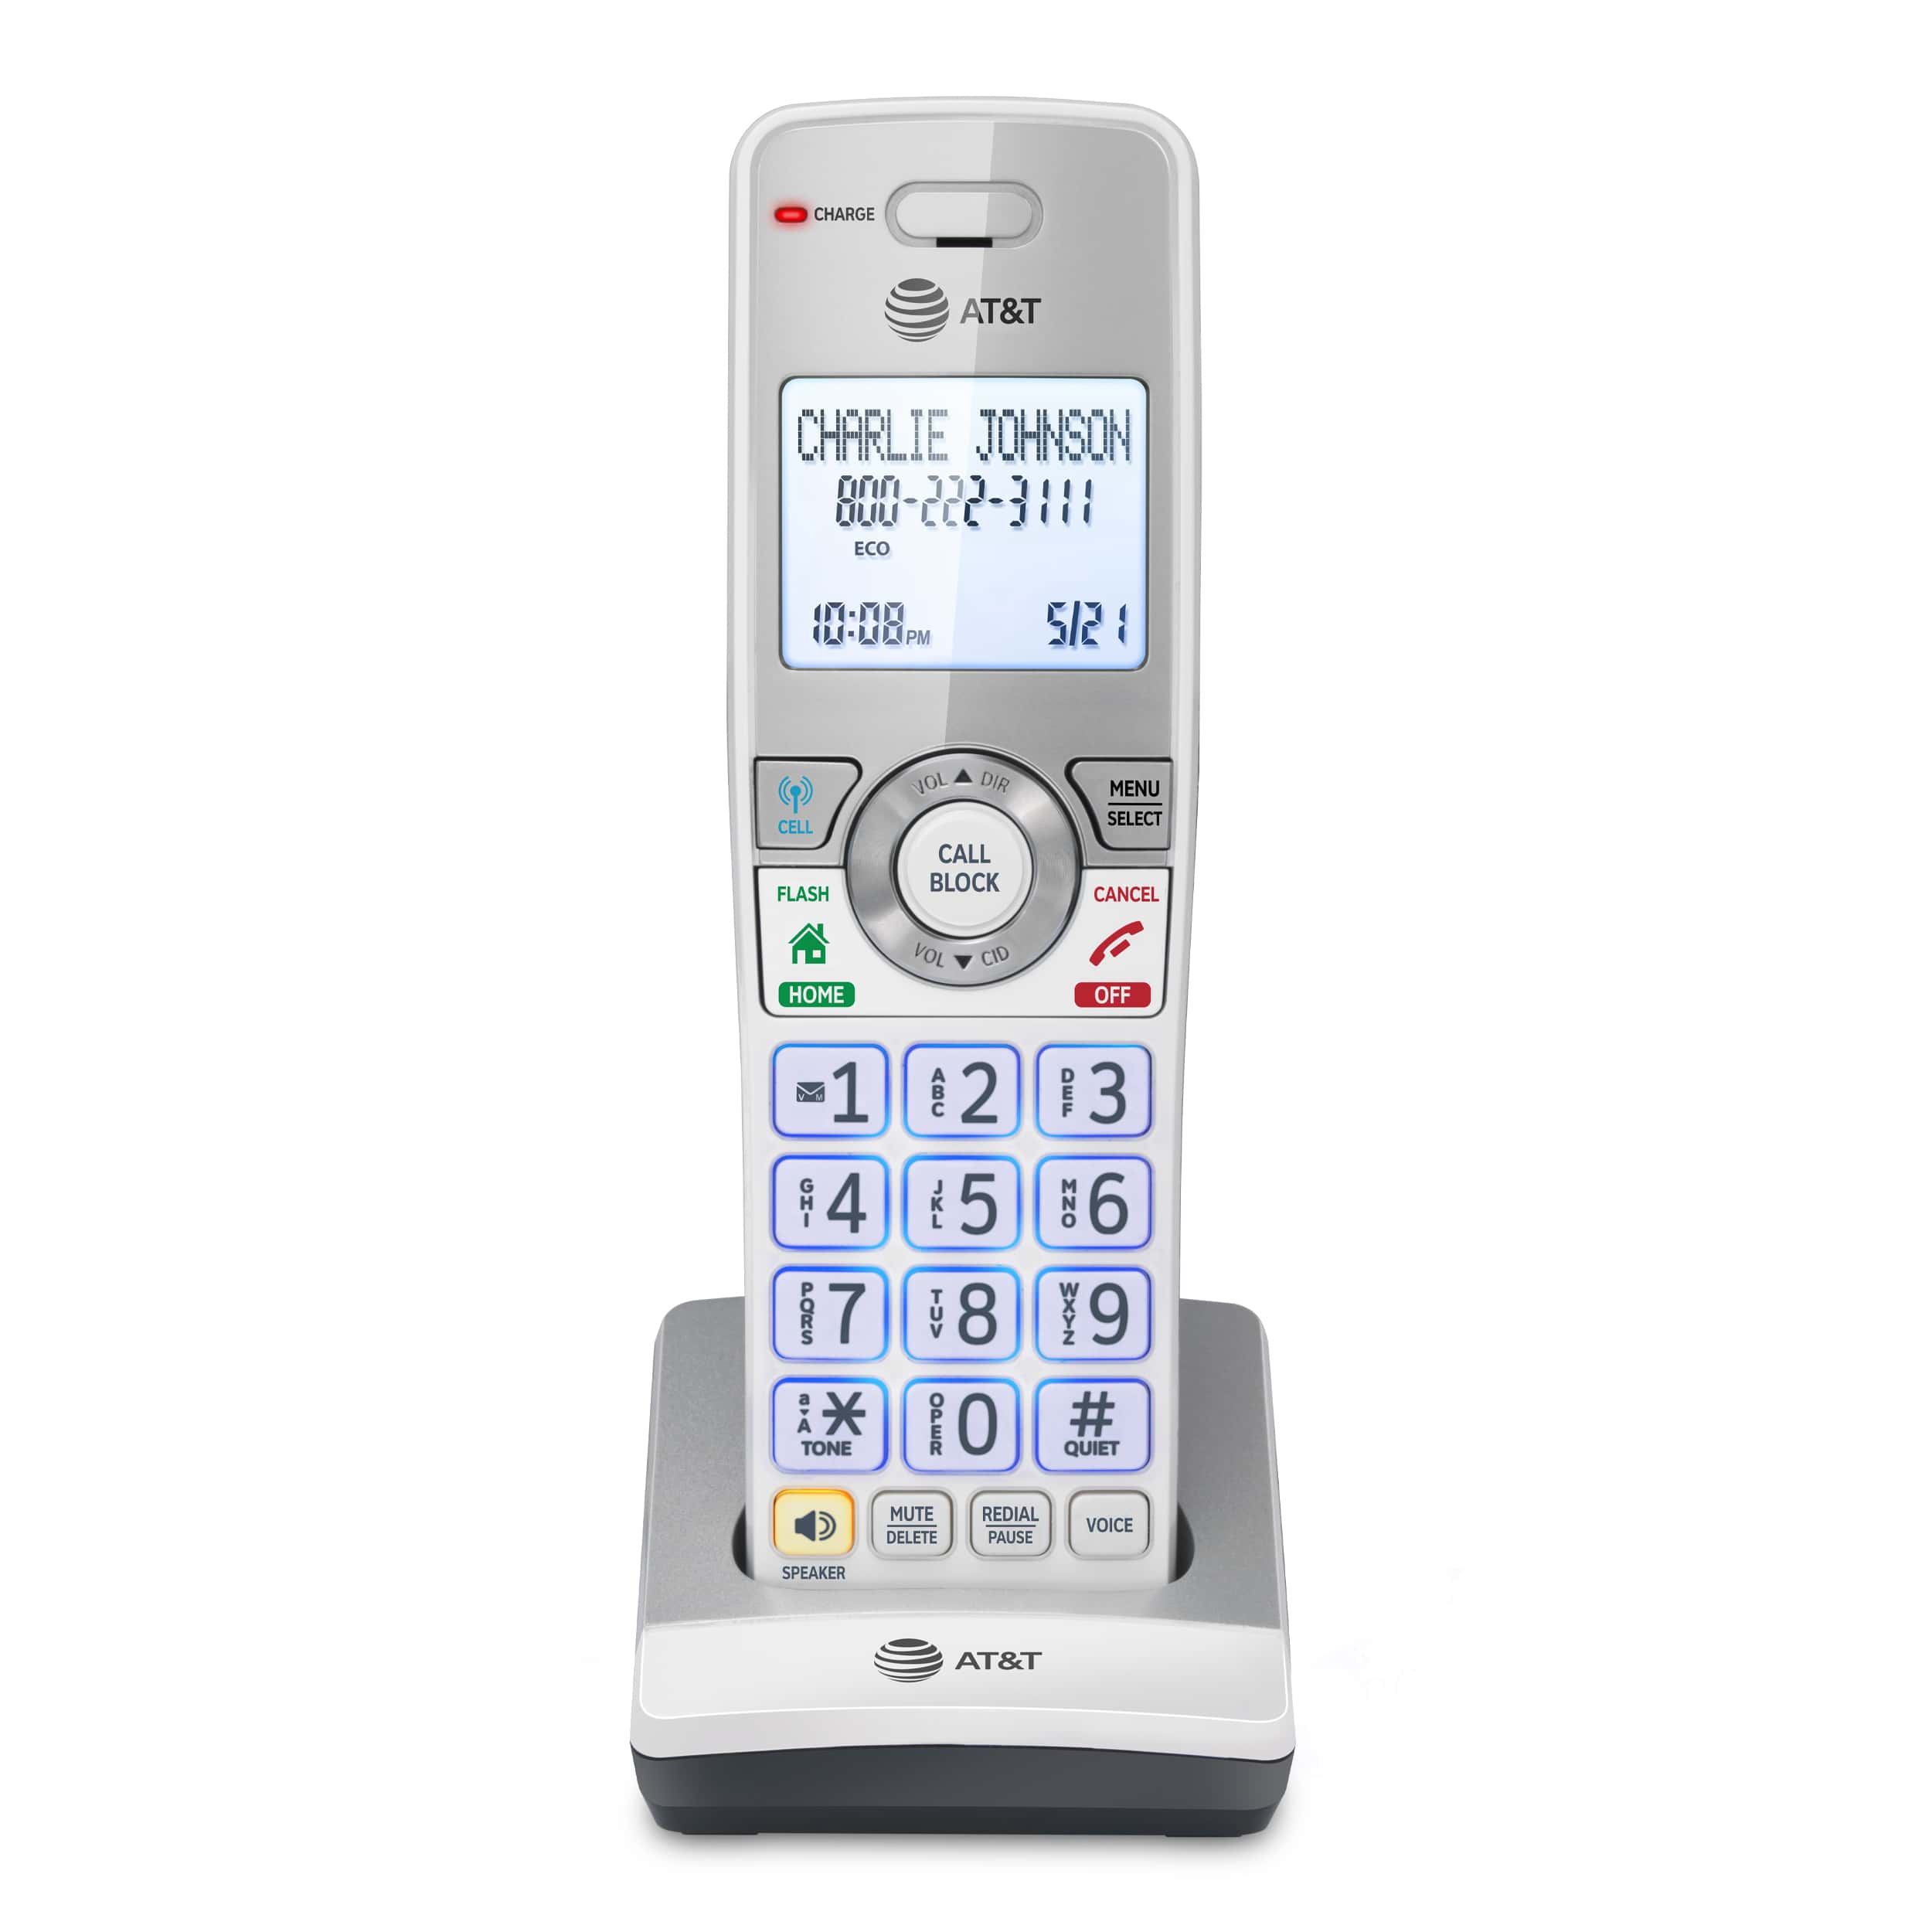 Accessory Handset with Unsurpassed Range, Bluetooth Connect to Cell, and Smart Call Blocker - view 1